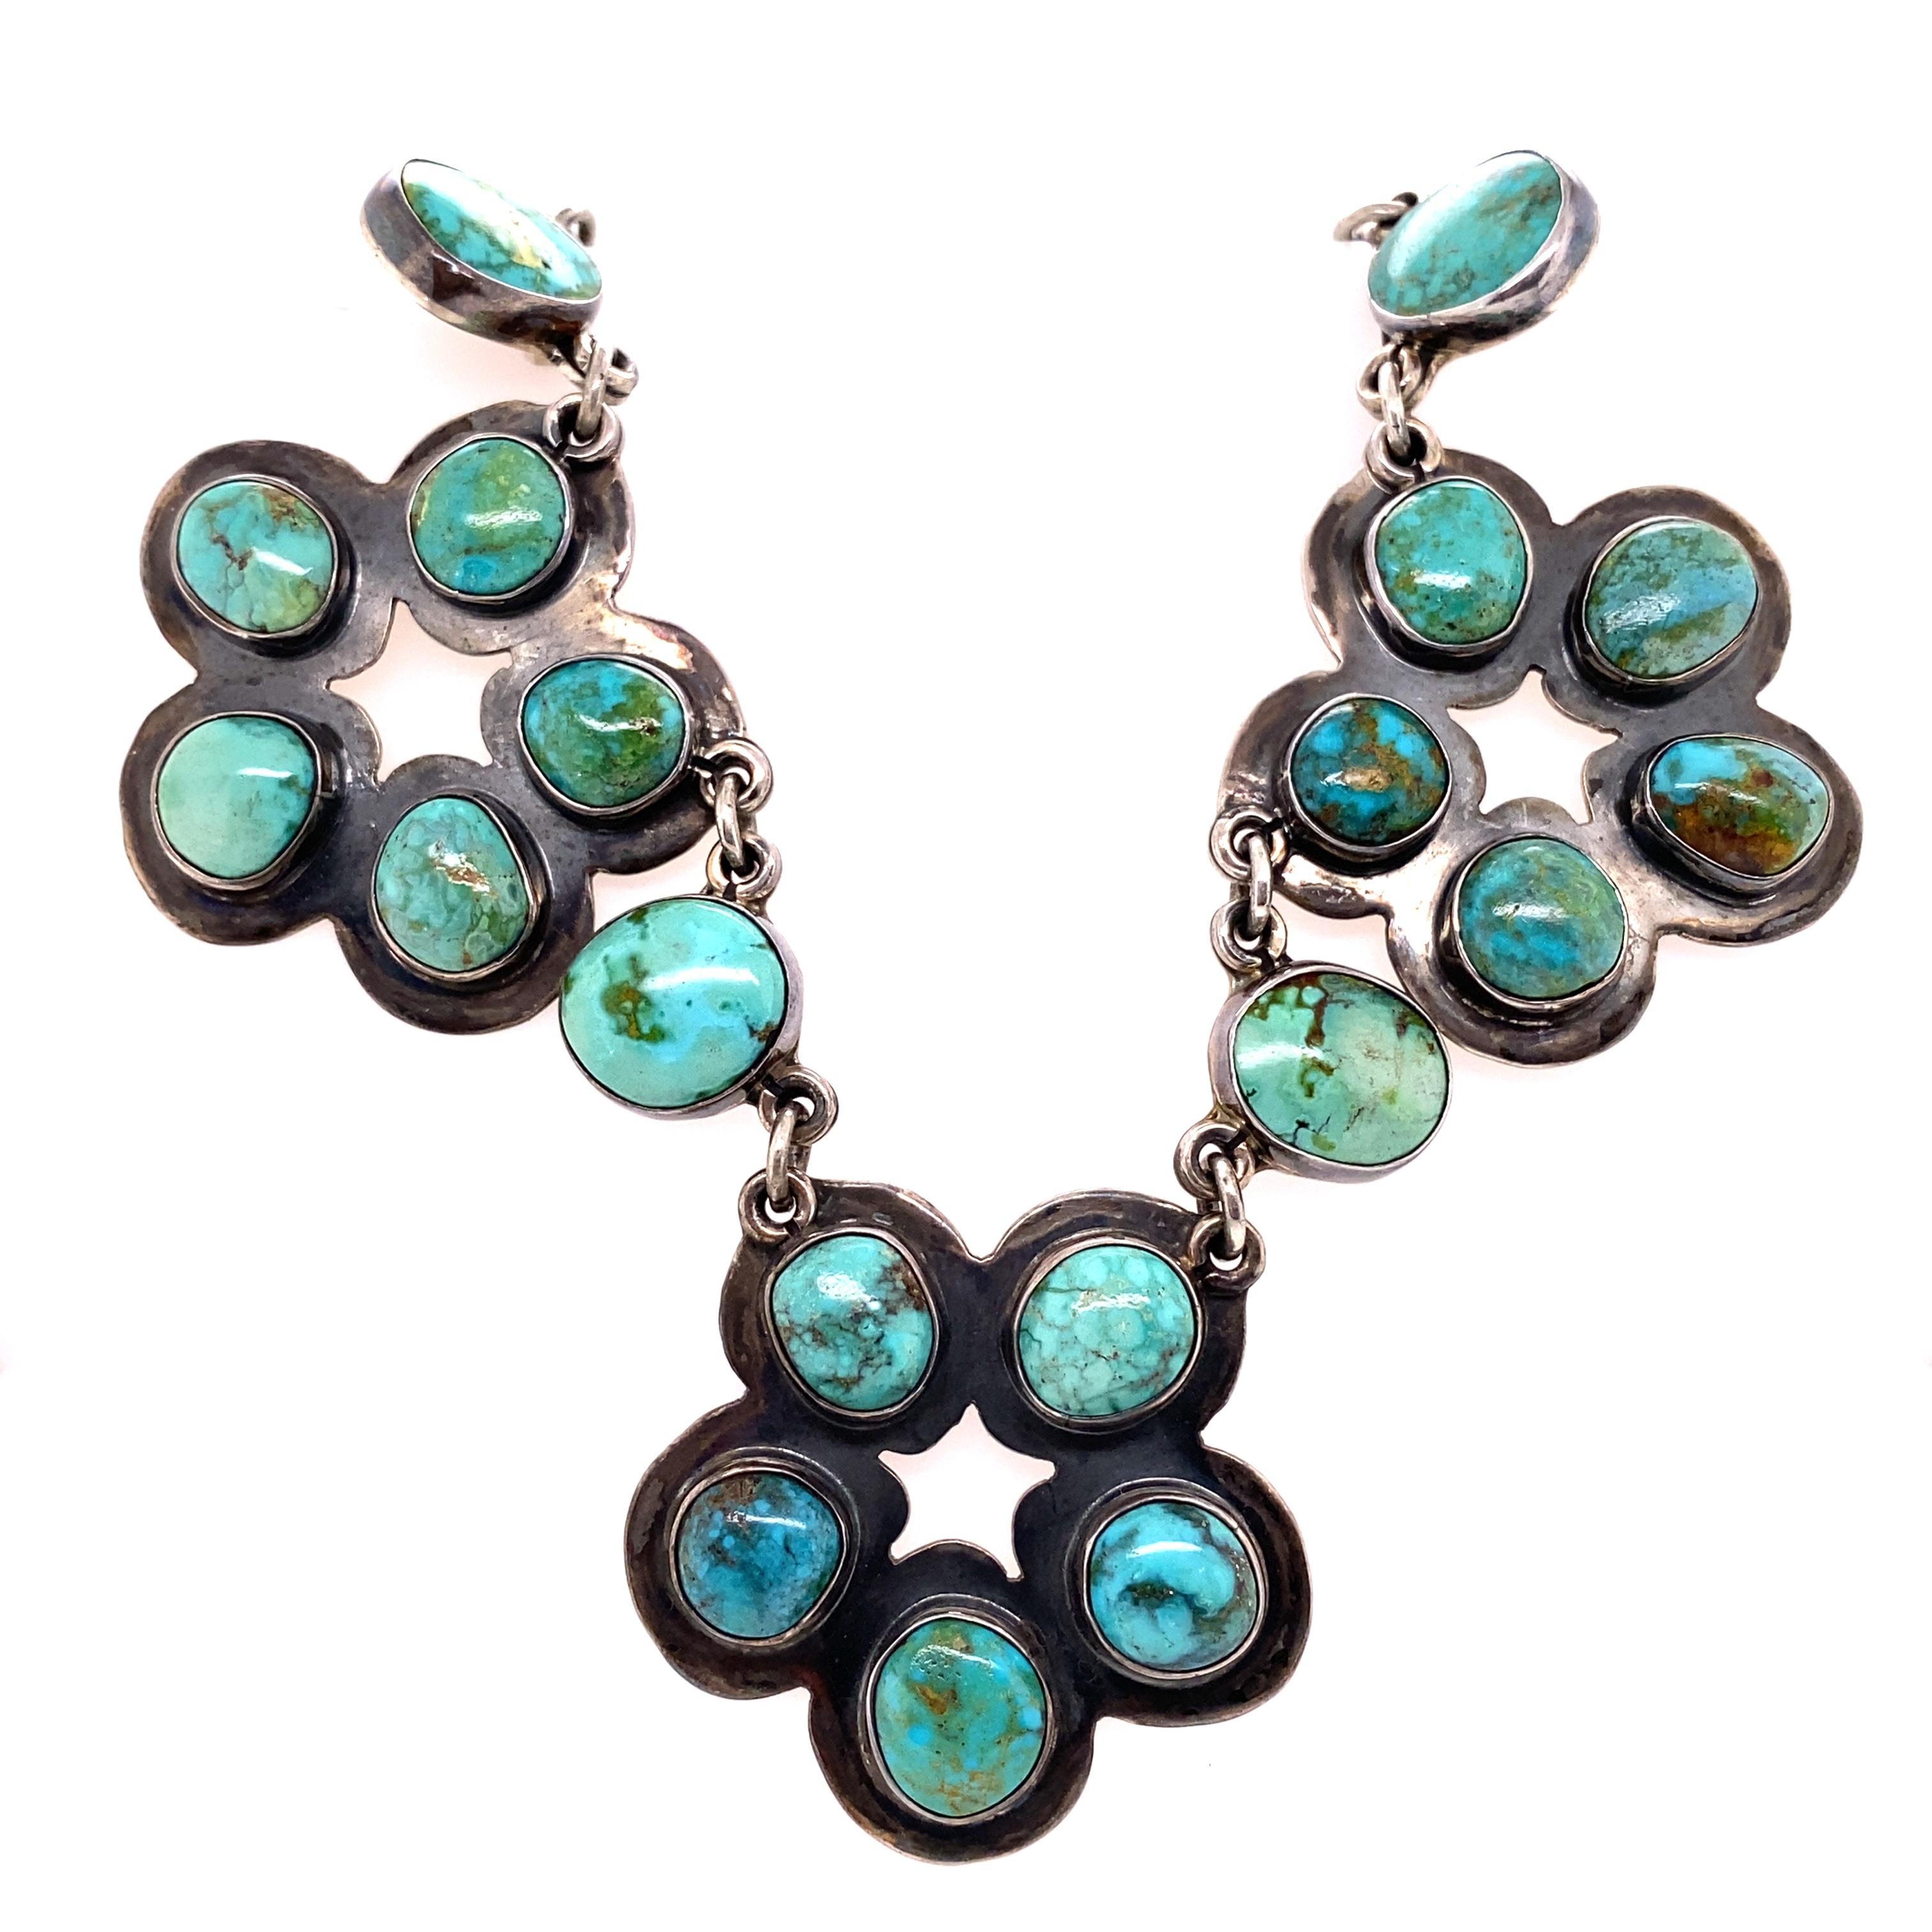 Highly desirable Signed JF Artist: Federico Jimenez Large Native American Navajo Turquoise Necklace. Featuring 5 Turquoise stations inter-spaced with Turquoise stones. Measuring approx. 20